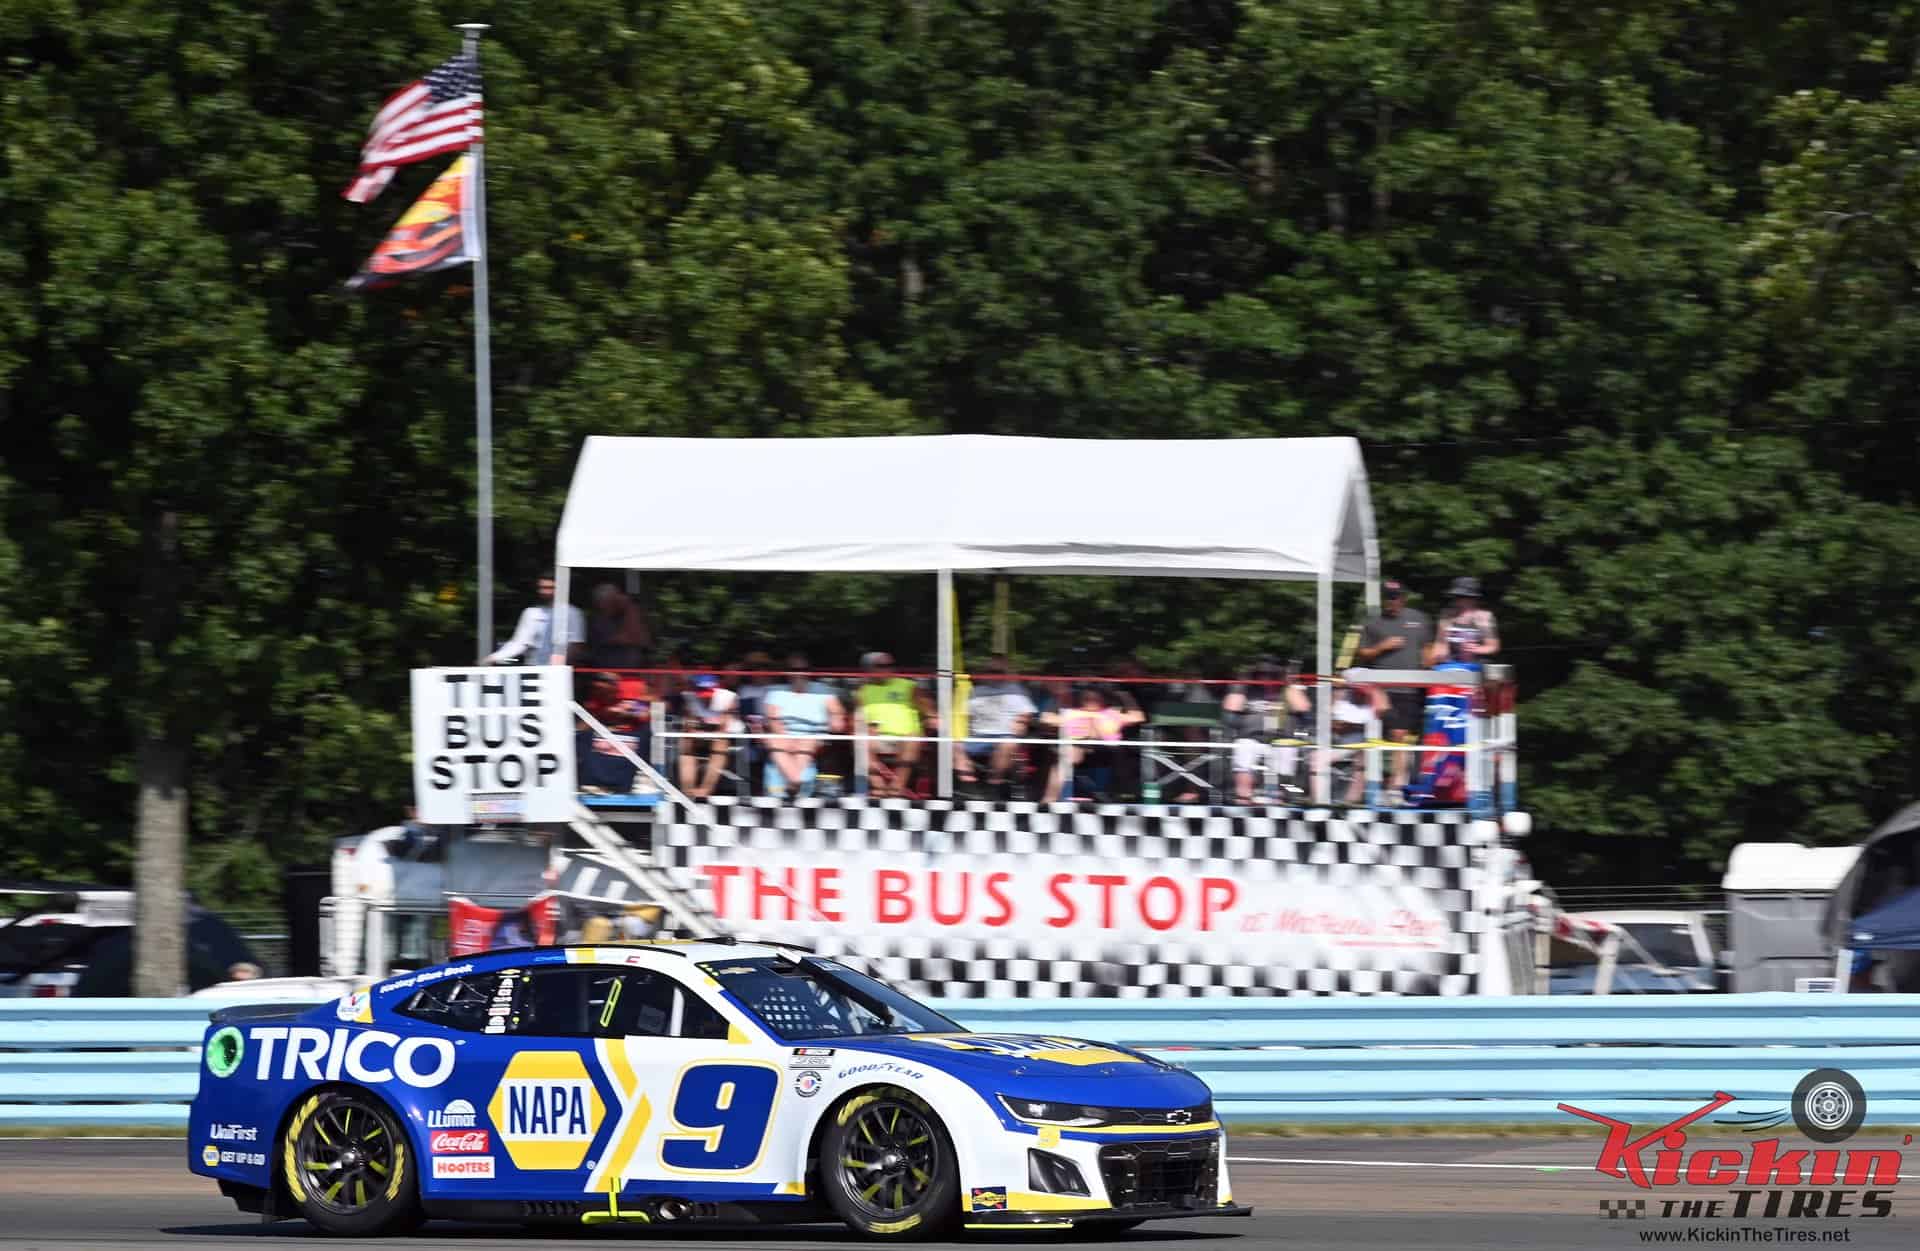 Chase elliott ran out of fuel in "the bus stop" area of the track last week at watkin's glen international. Photo by jerry jordan/kickin' the tires